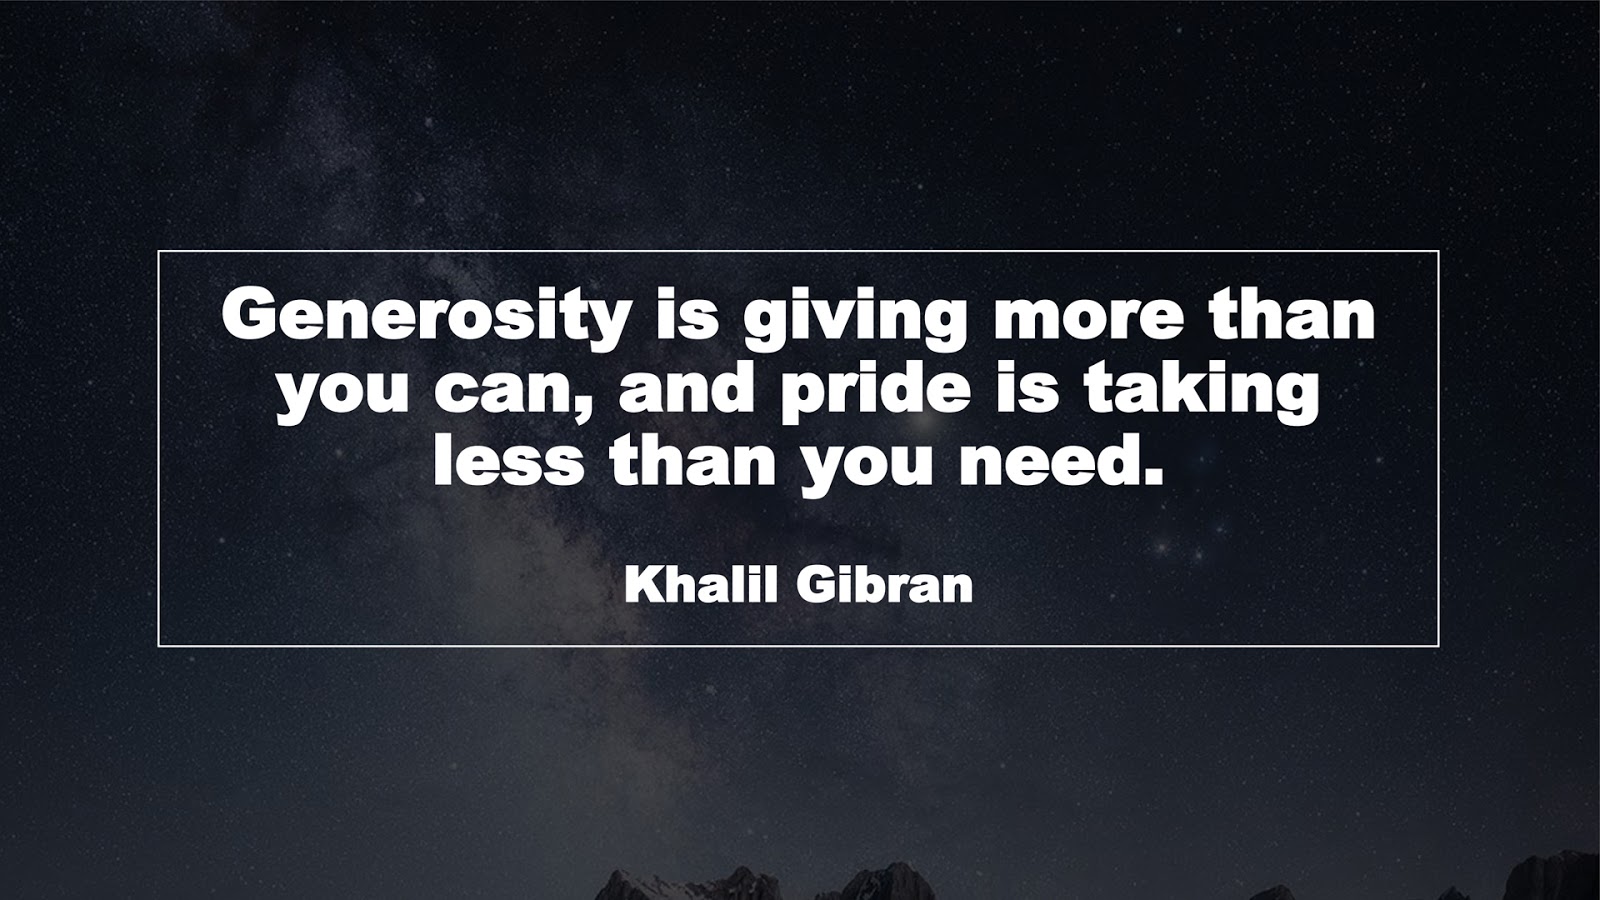 Generosity is giving more than you can, and pride is taking less than you need. (Khalil Gibran)